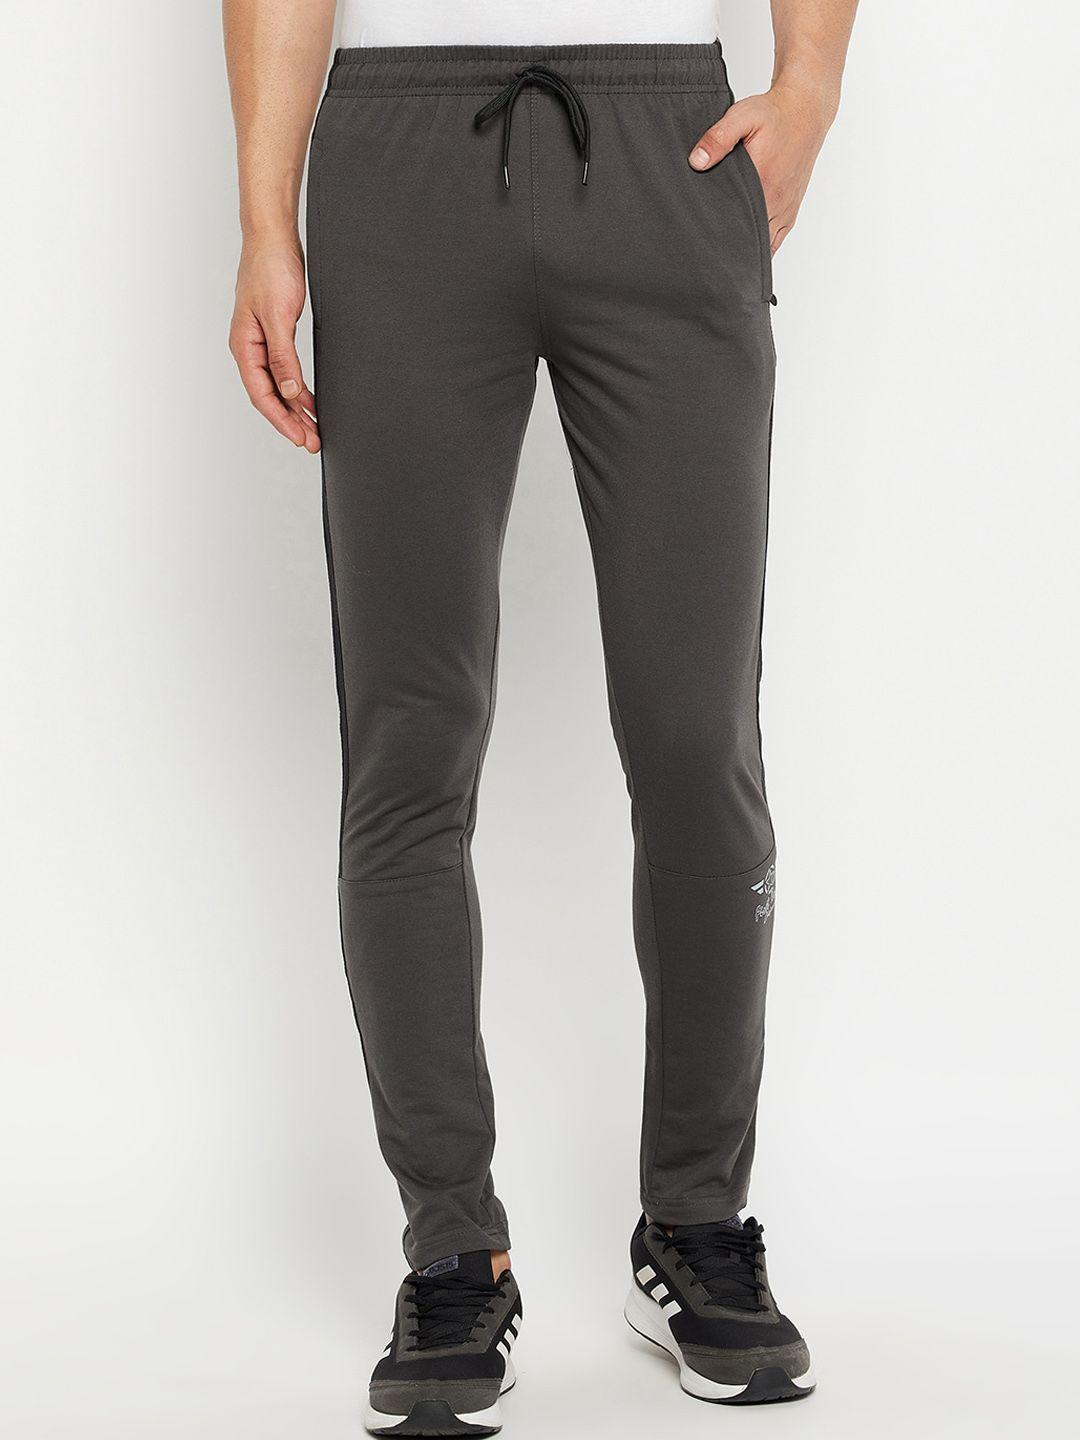 firstkrush men grey solid cotton track pants